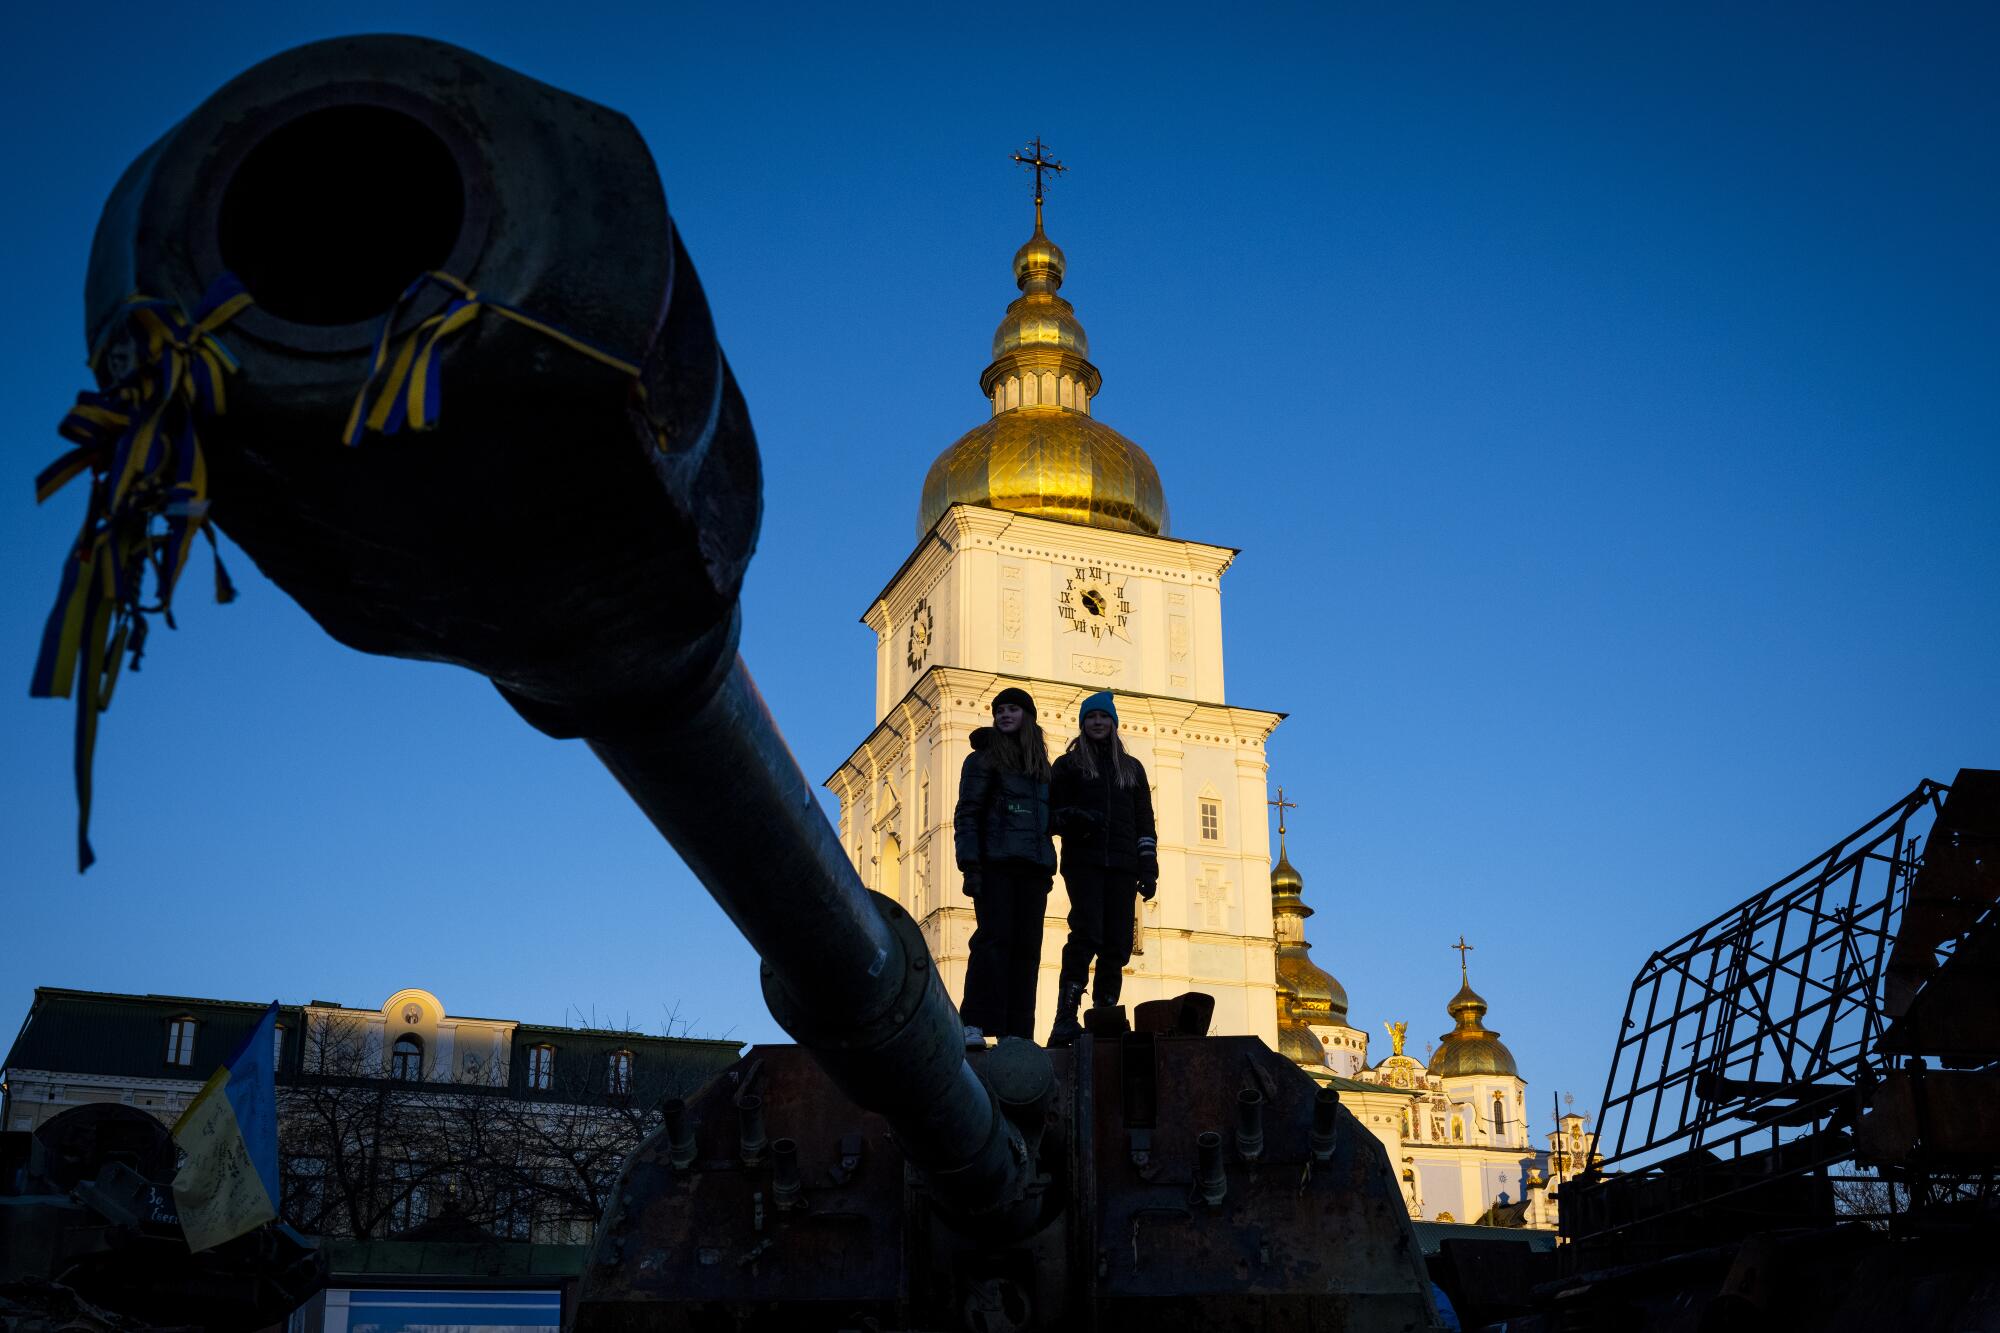 People view captured Russian equipment, including tanks, in front of a  golden-domed building.